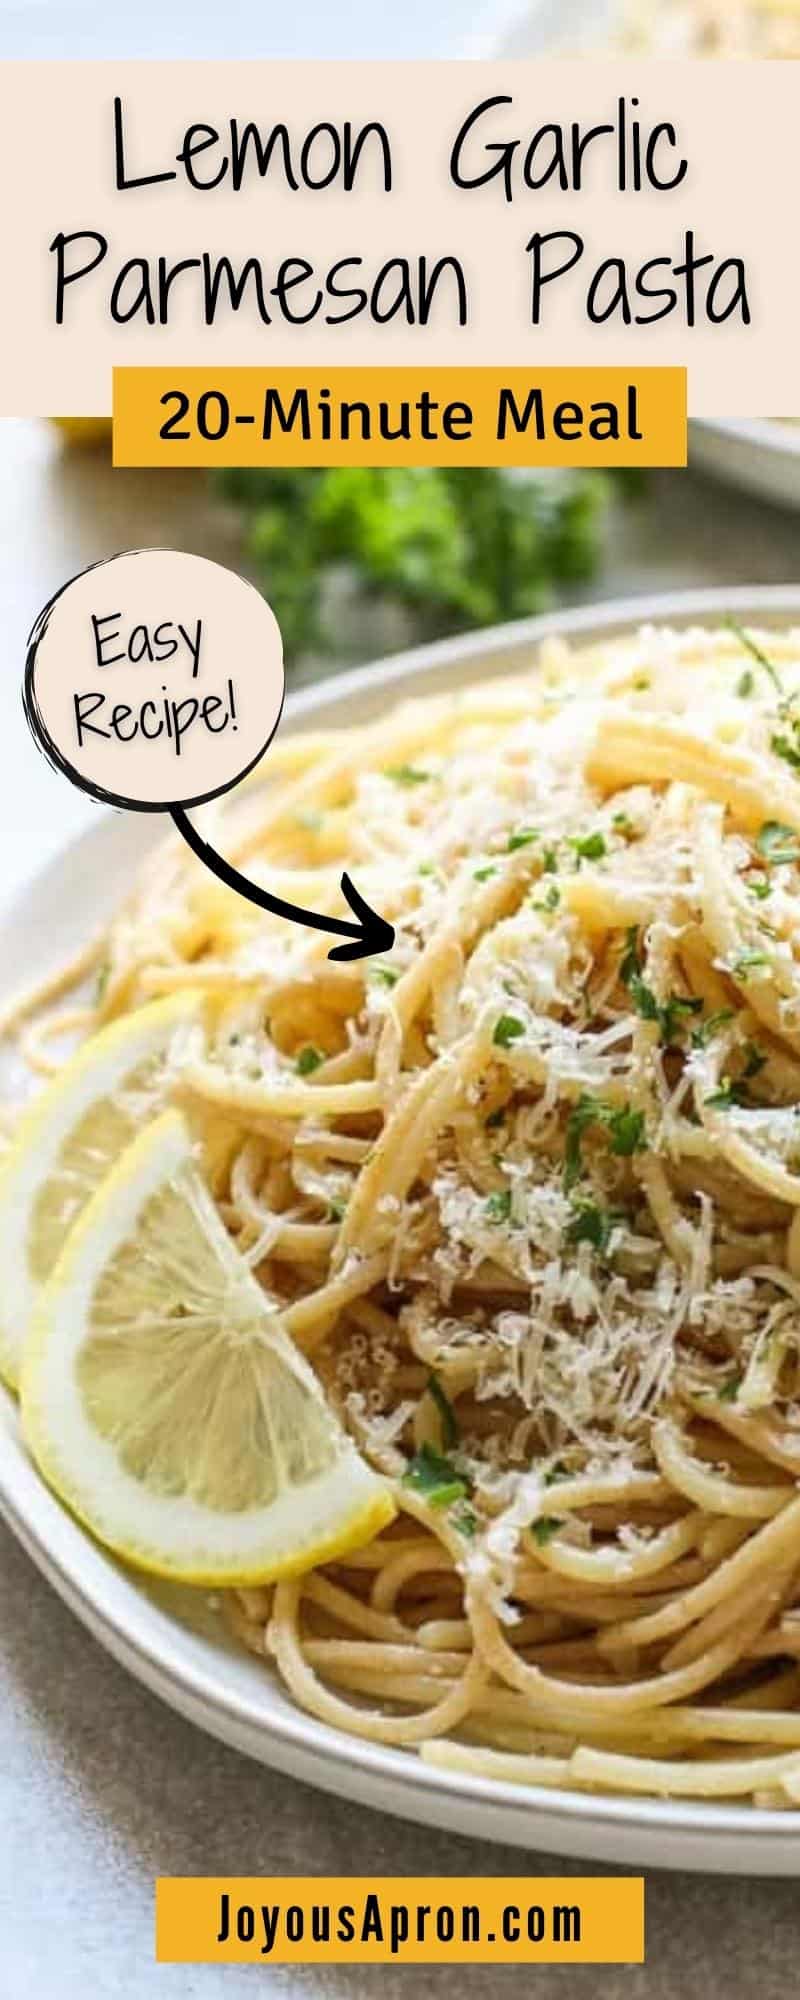 Lemon Garlic Parmesan Pasta - Easy, quick and light spaghetti pasta dish, perfect as a side or a main dish! Perfect for a summer dinner or lunch, cookout or parties. Save well as leftovers and great for meal prep as well! via @joyousapron